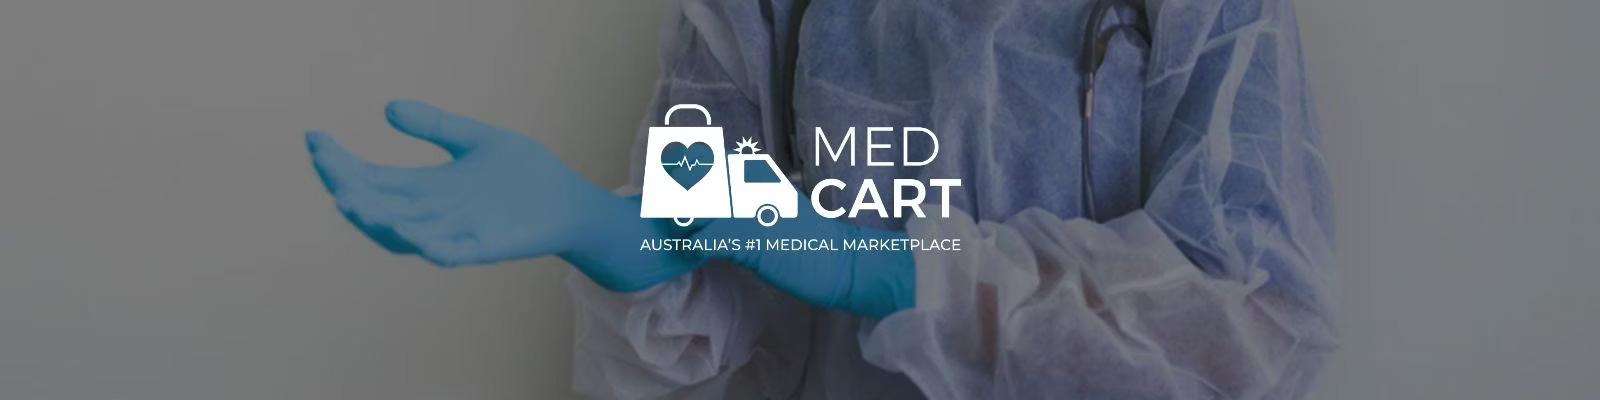 why-sell-on-medcart-banner